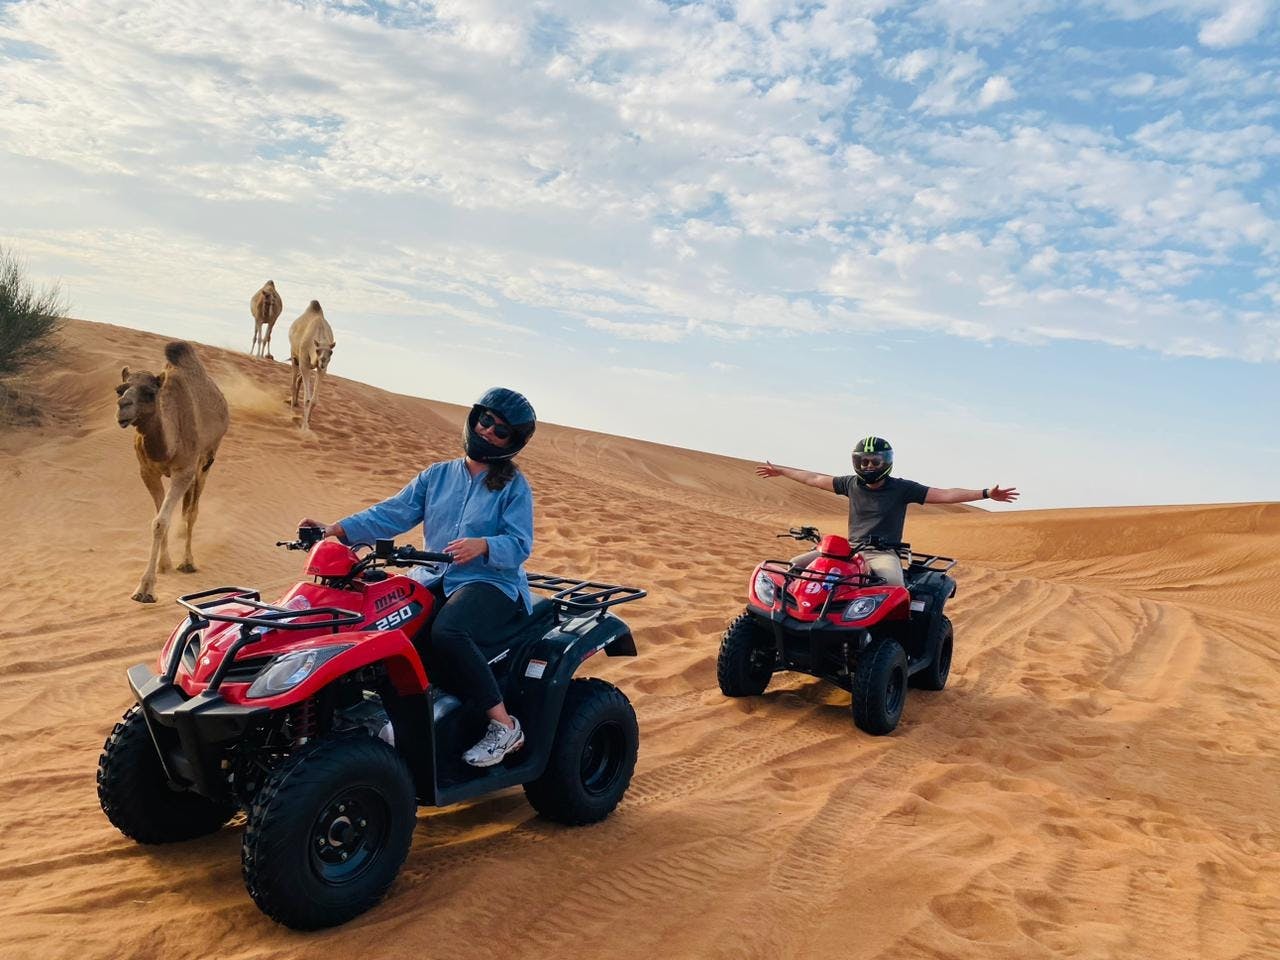 Double quad ride in Dubai Desert with sandboarding, camel ride and BBQ